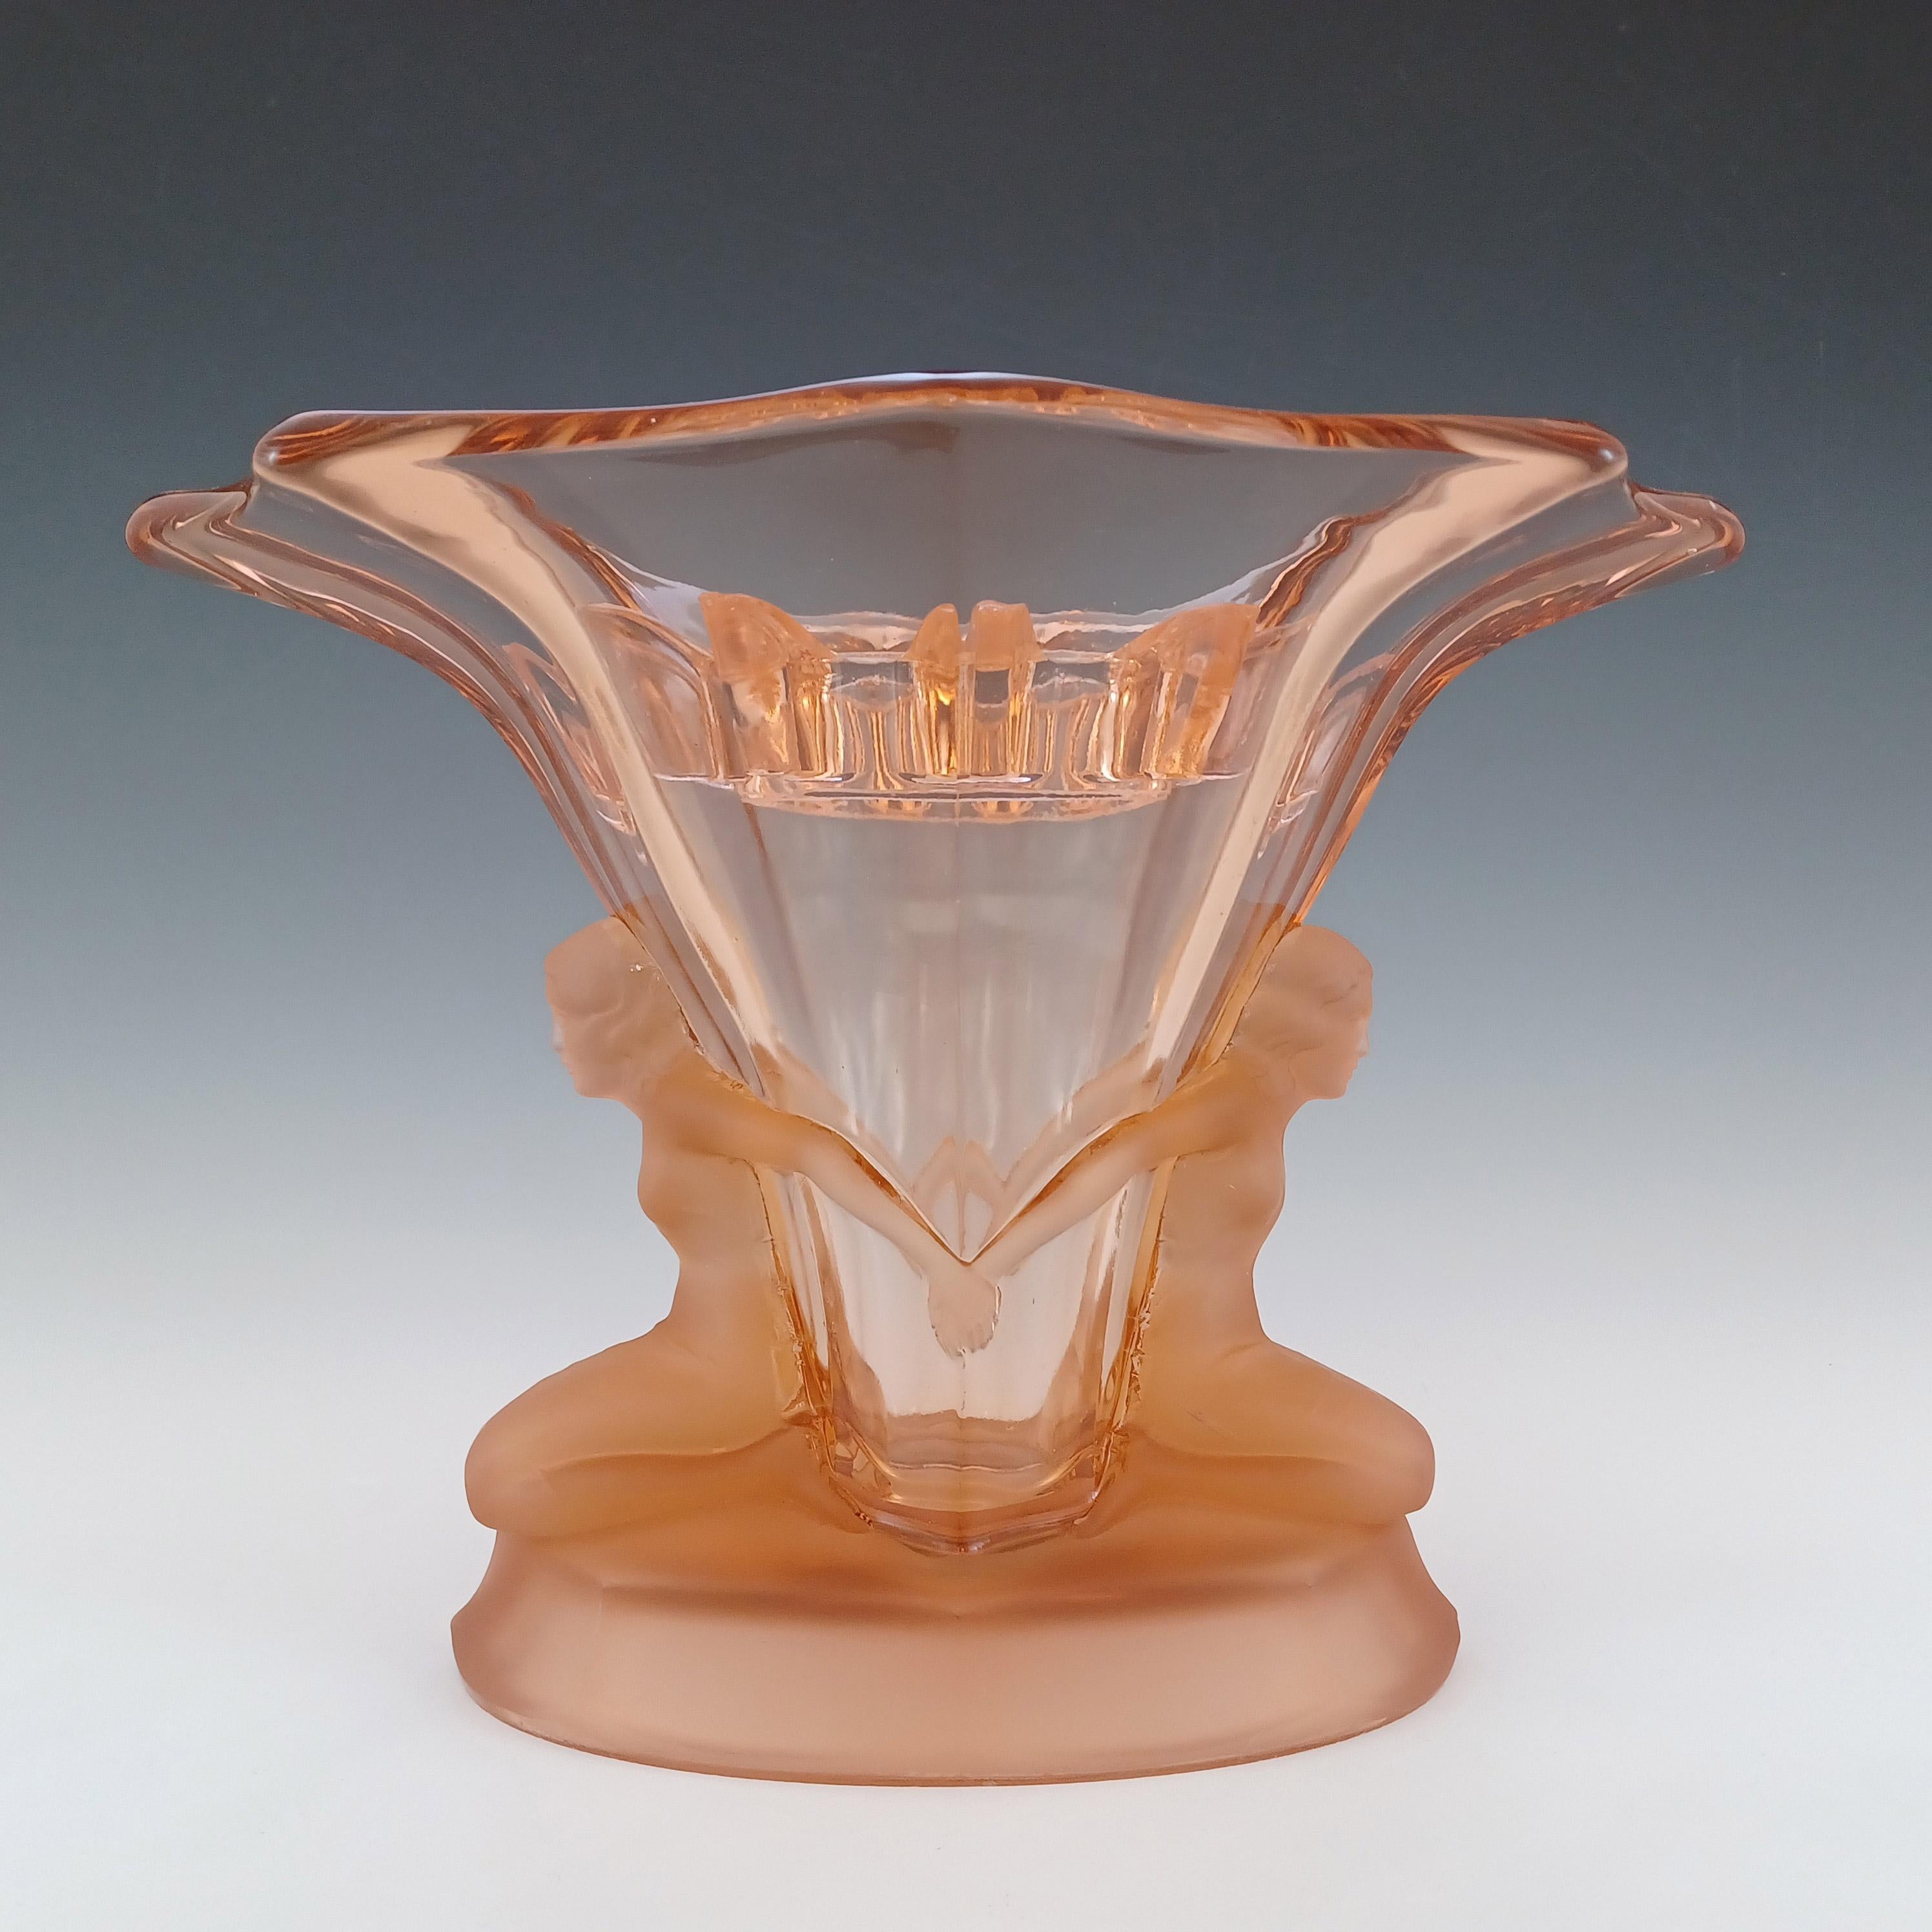 A wonderful large and heavy (2kg unpacked) art deco pink glass vase. Made by German company Auguste Walther & Söhne in the 1930's, part of their 'Windsor' pattern range, and is featured in their 1934 product catalogue.

Size
Measures approx 8 inches